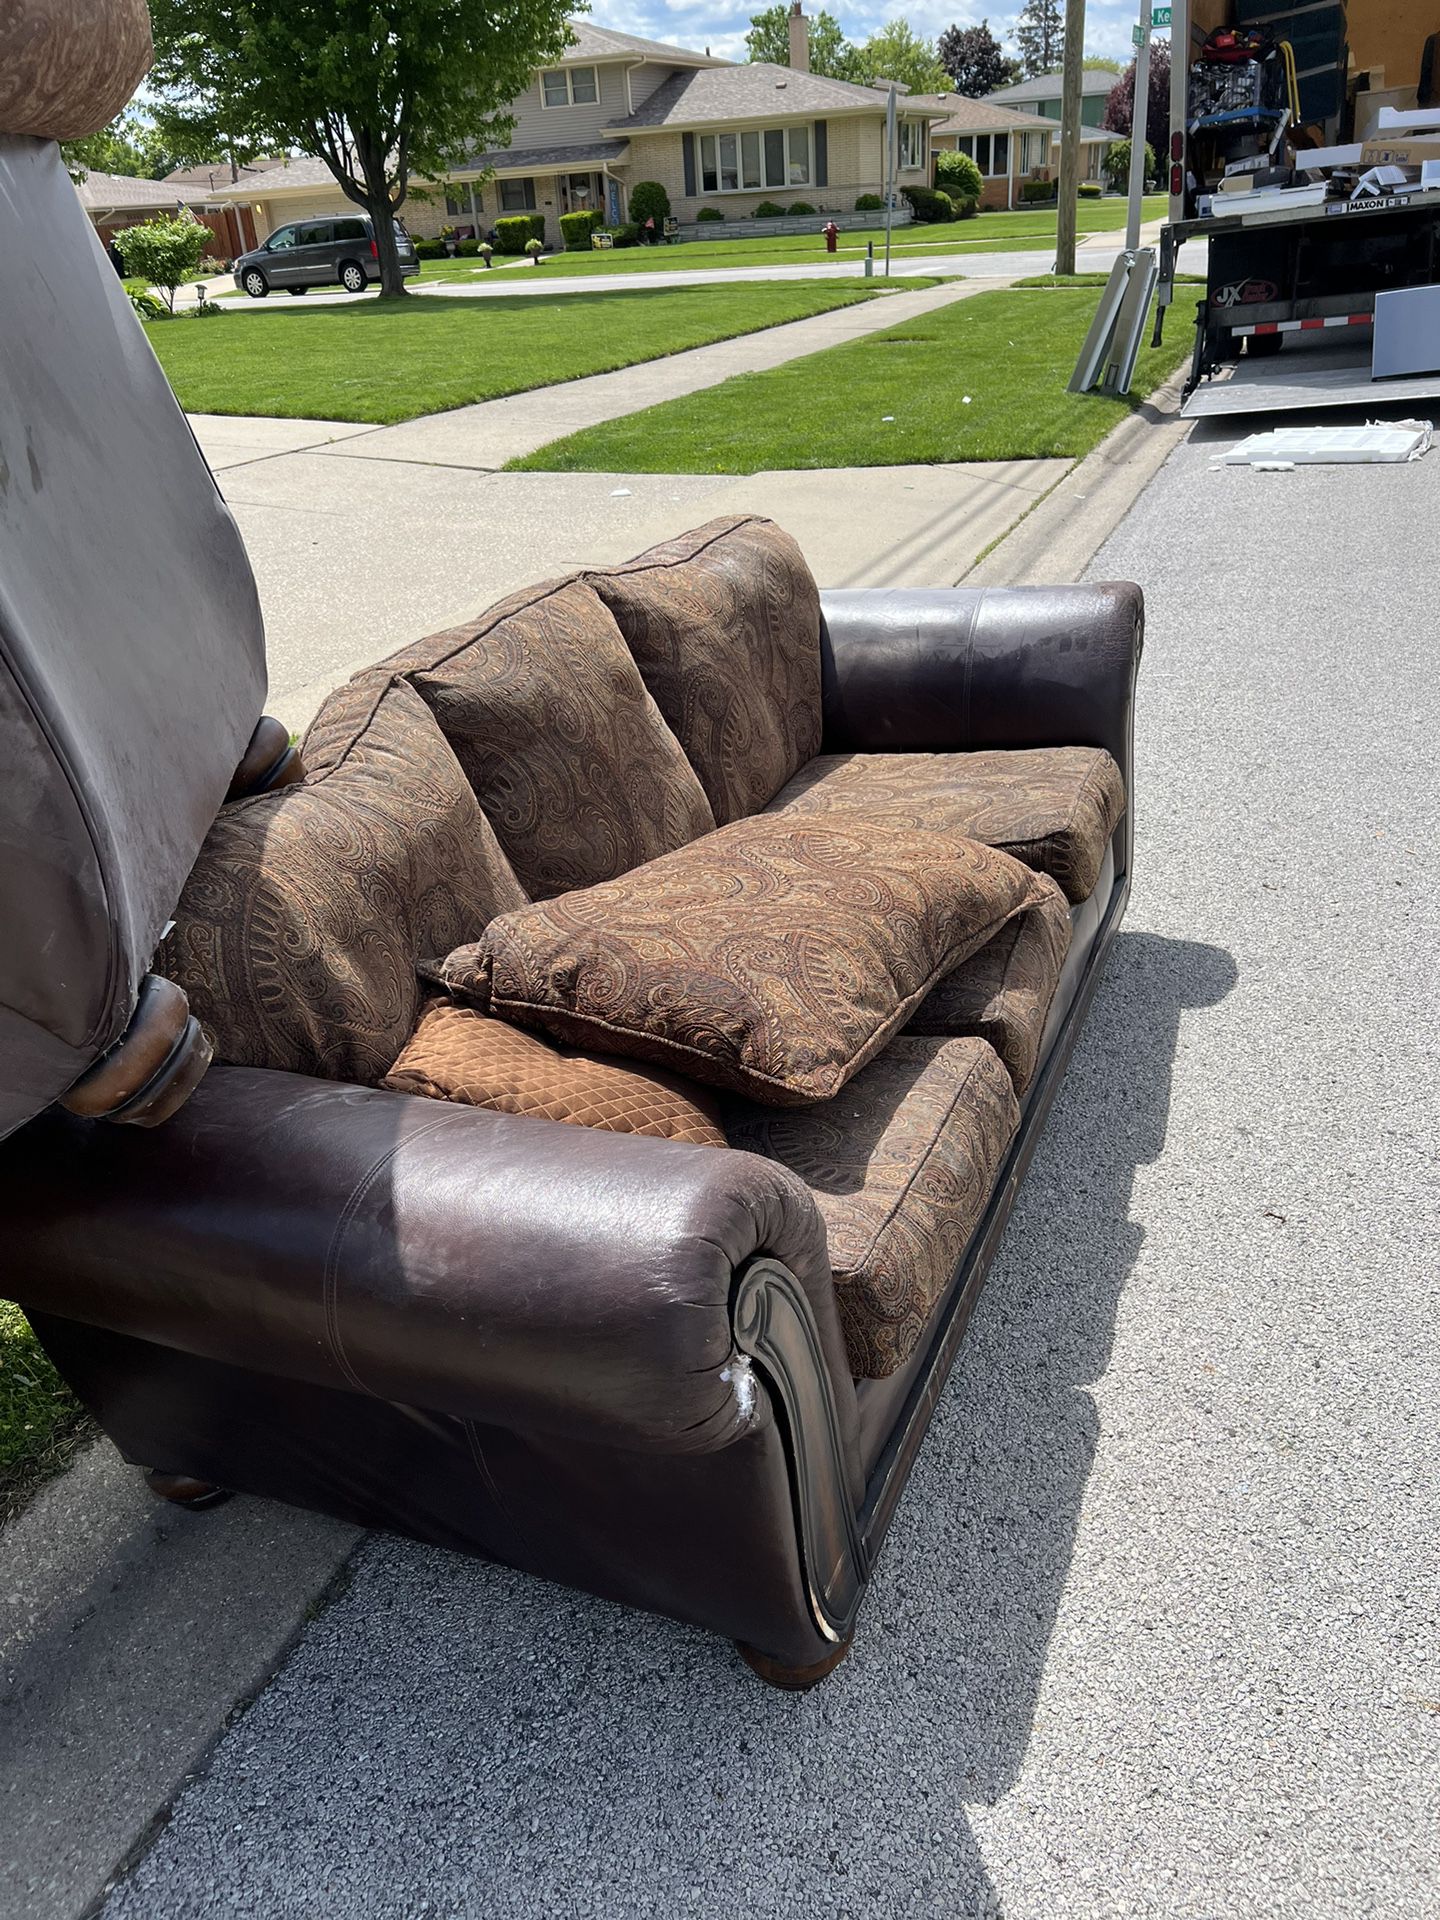 Free Couches in good condition. 